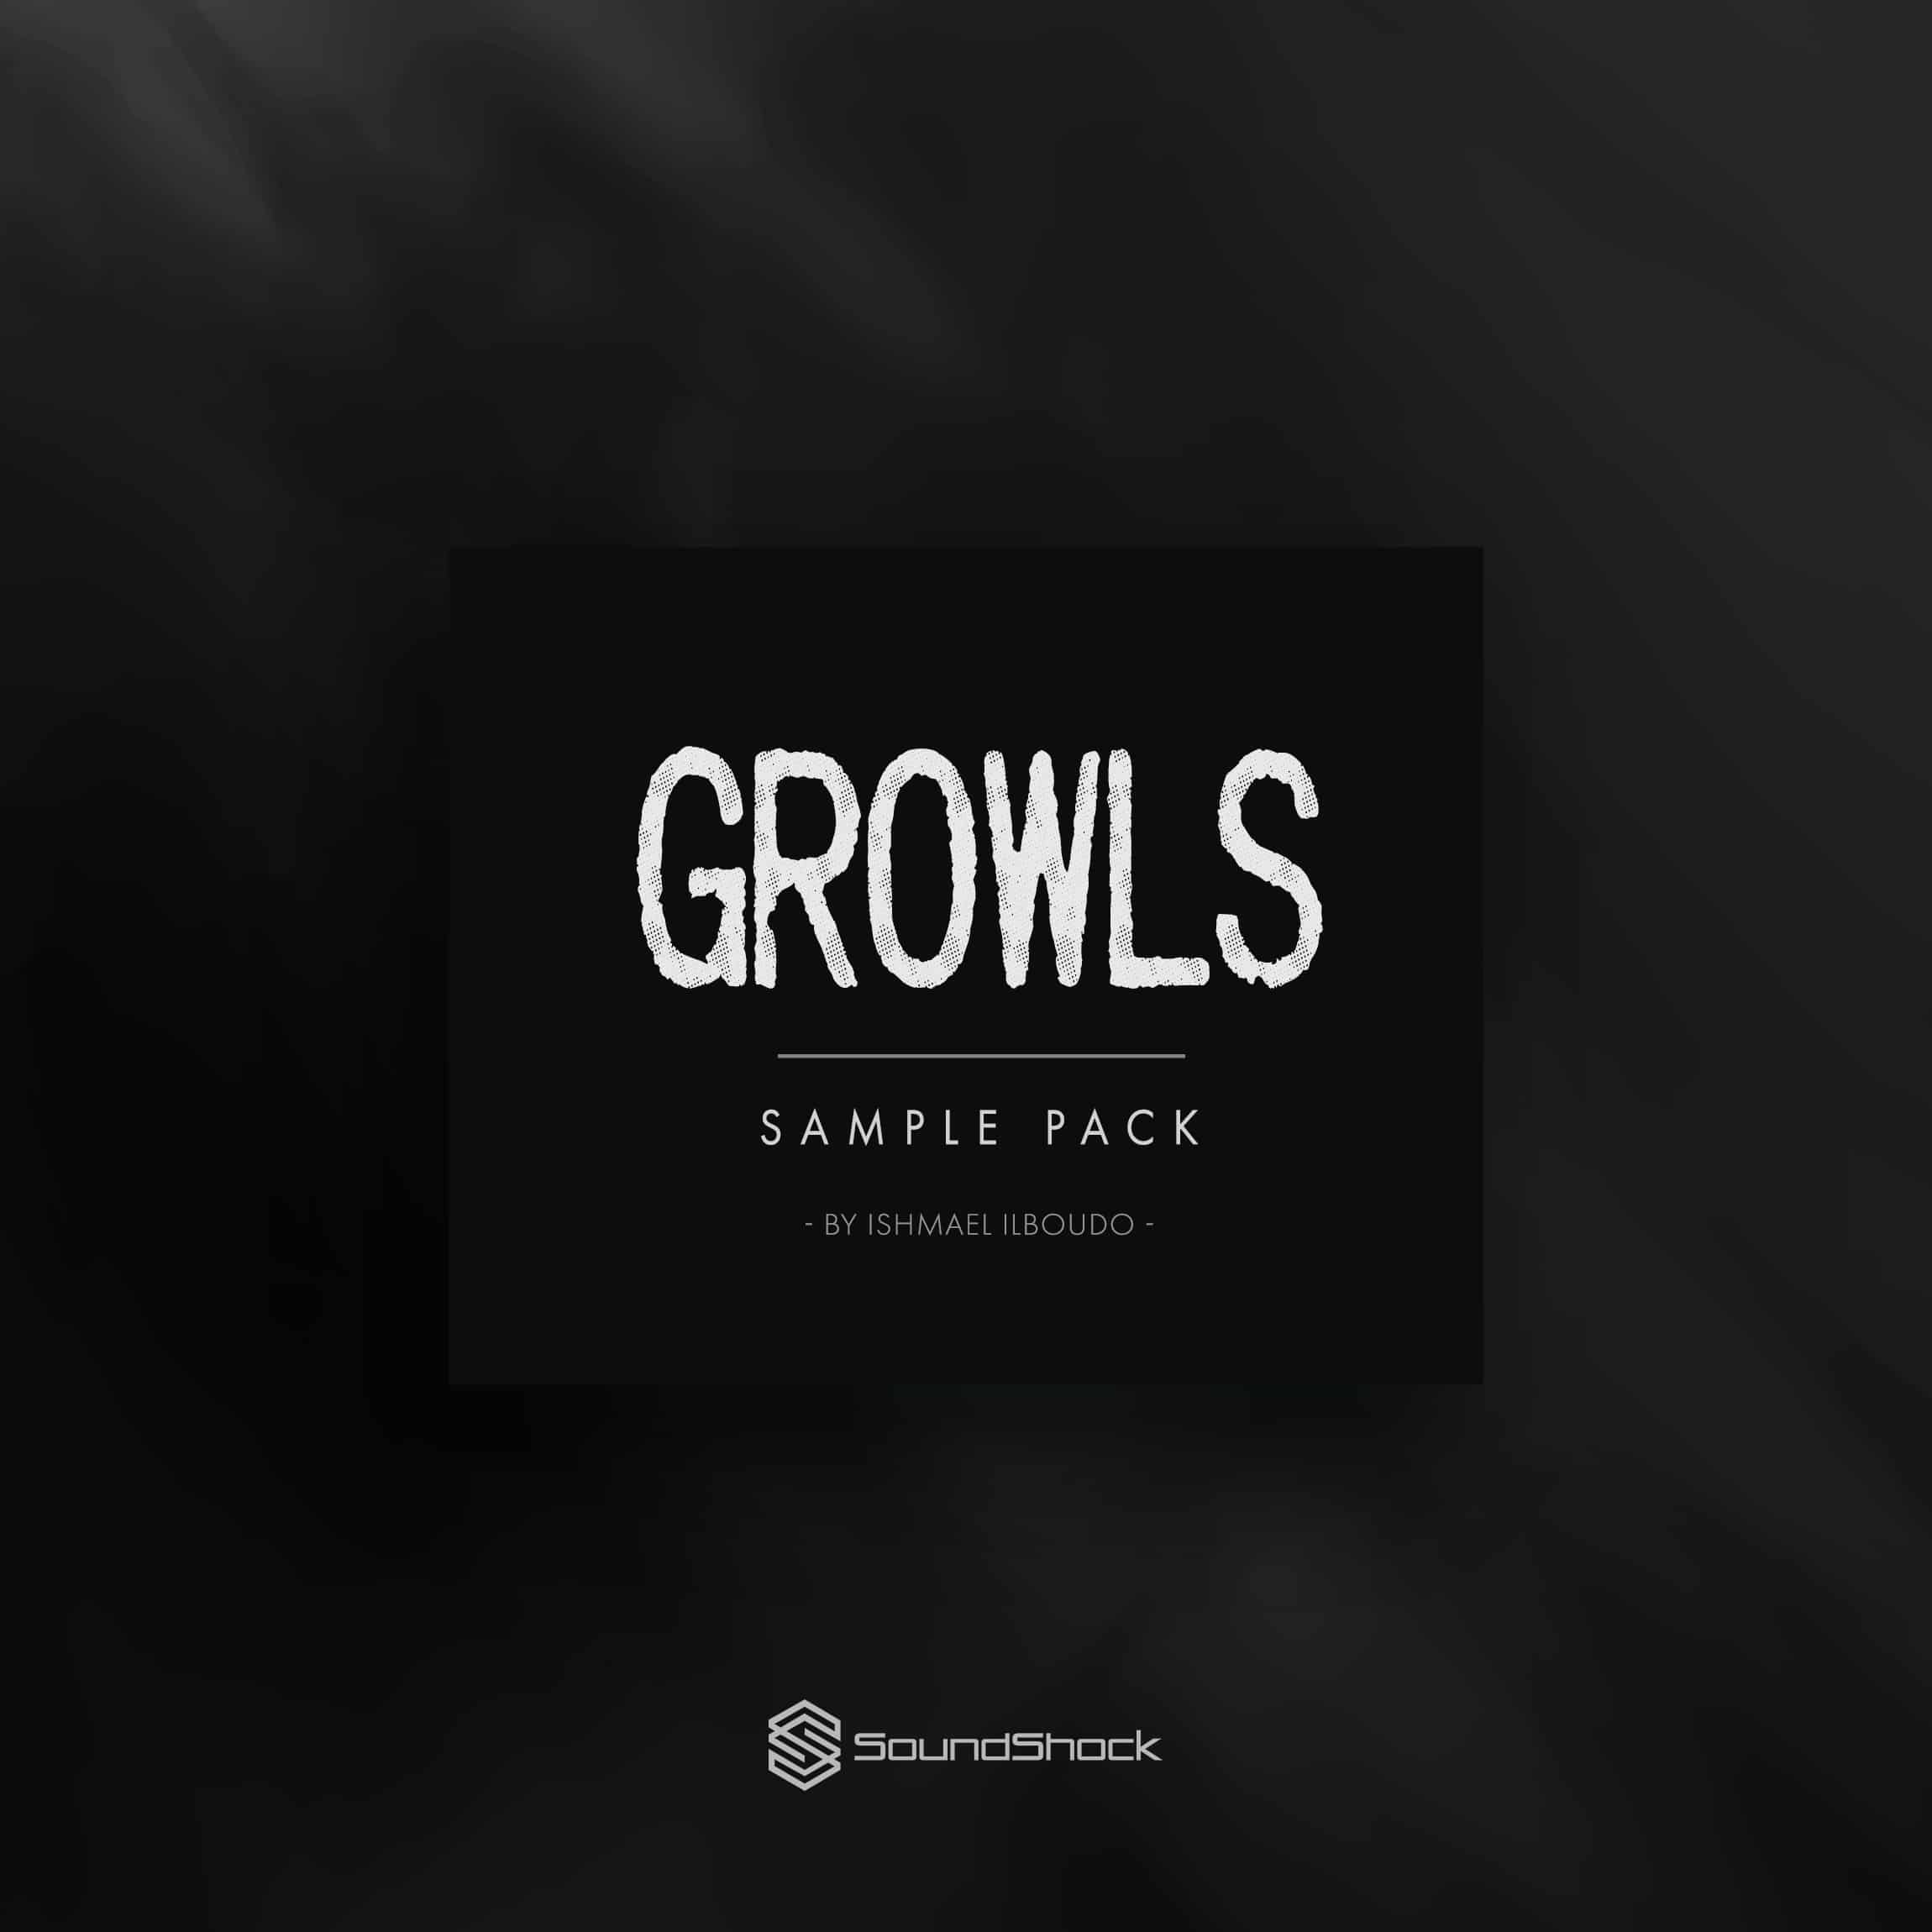 Growls sample pack with badges.